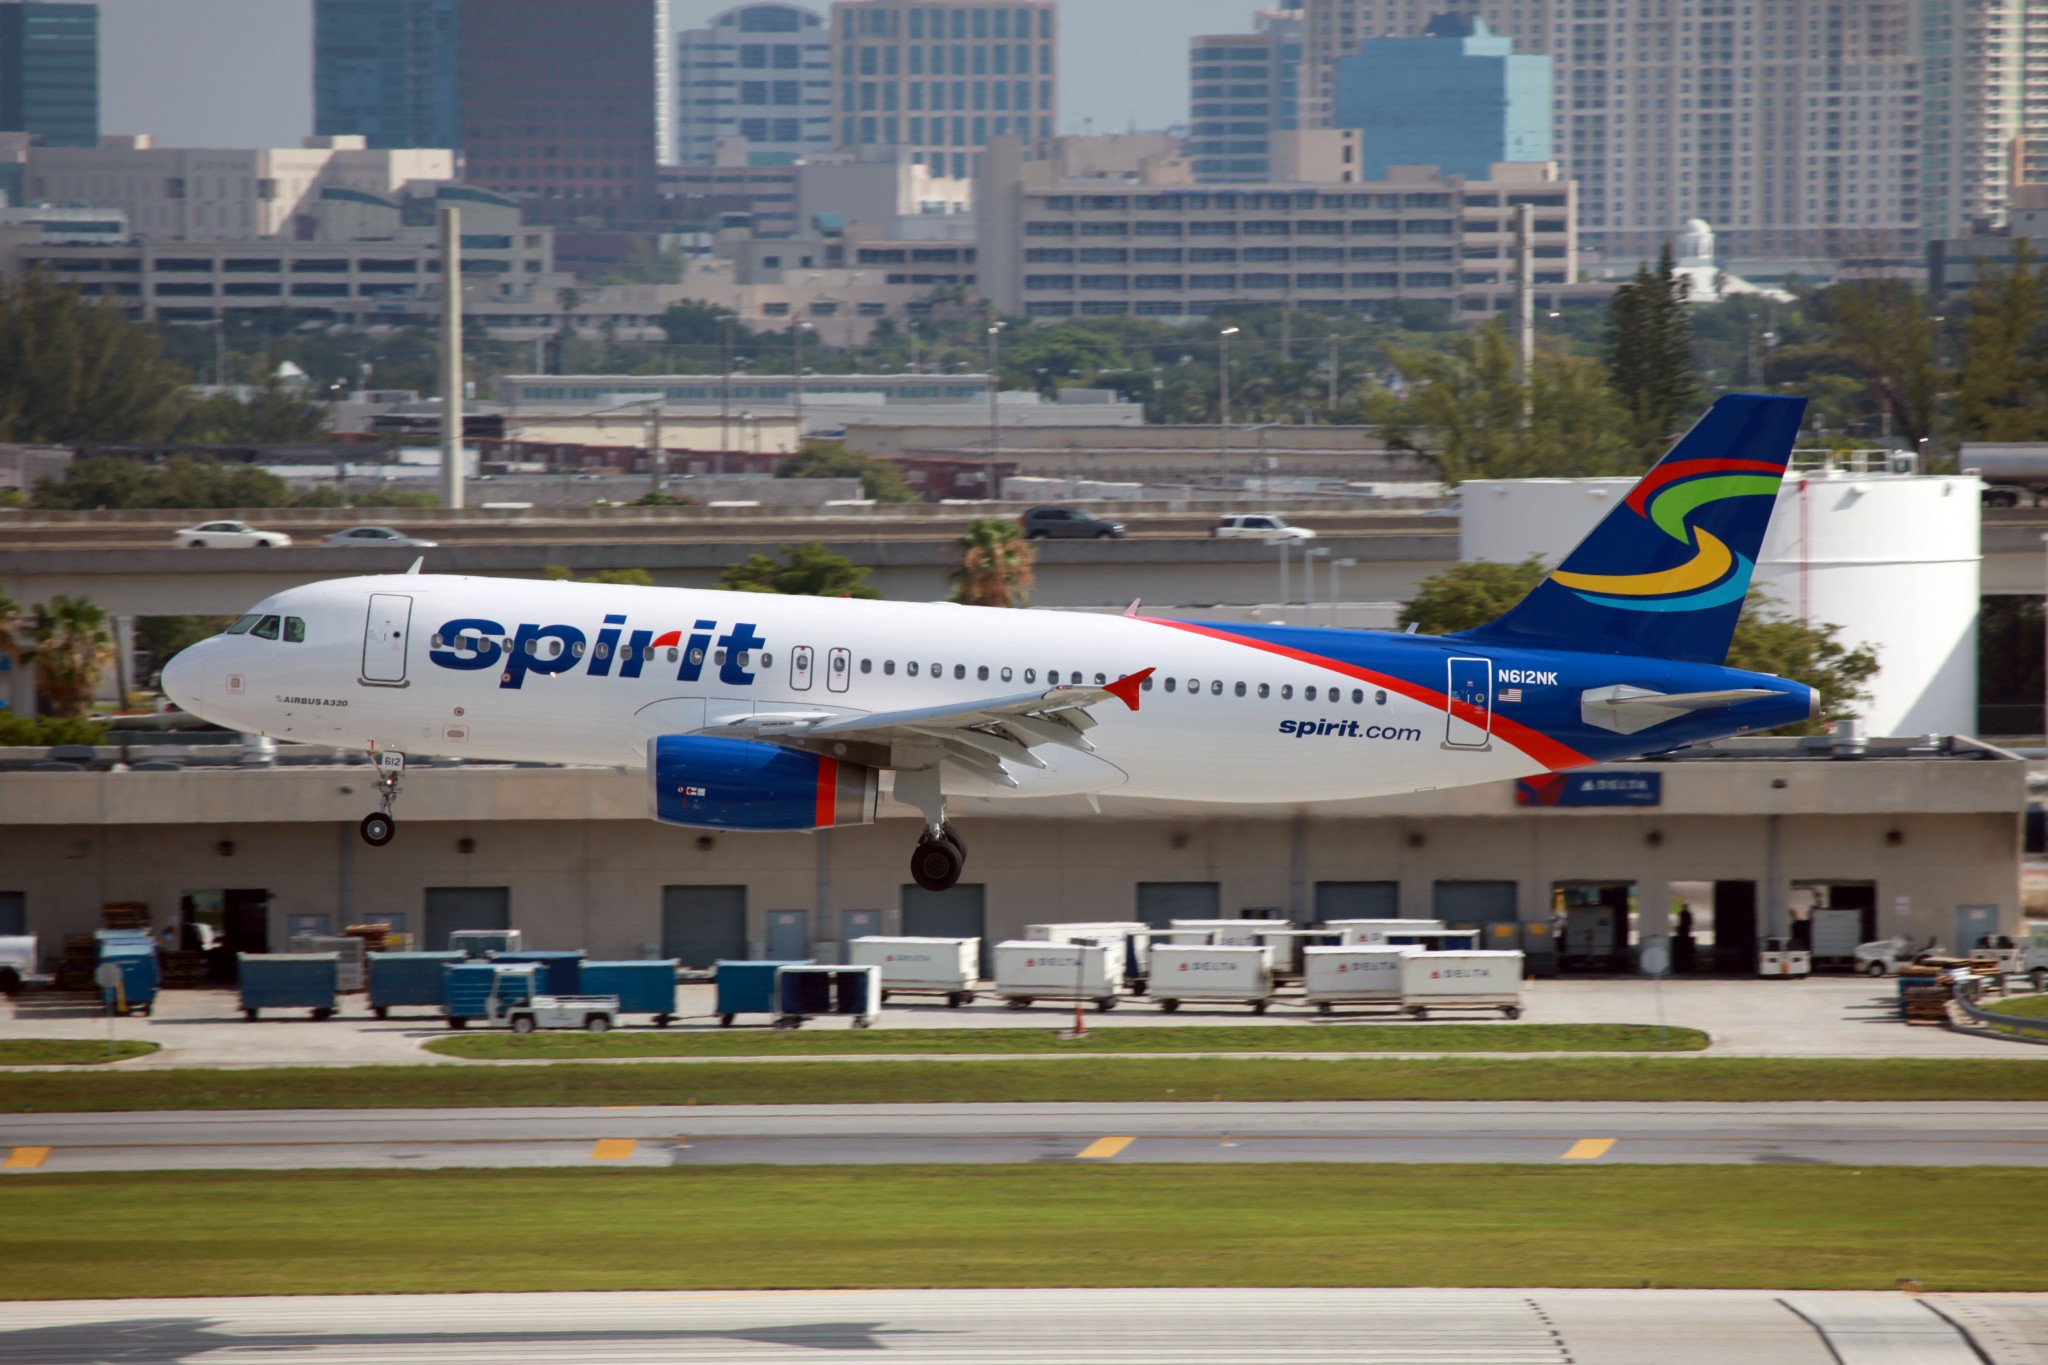 Spirit reports 15.3% increase in pre-tax earnings for 2019